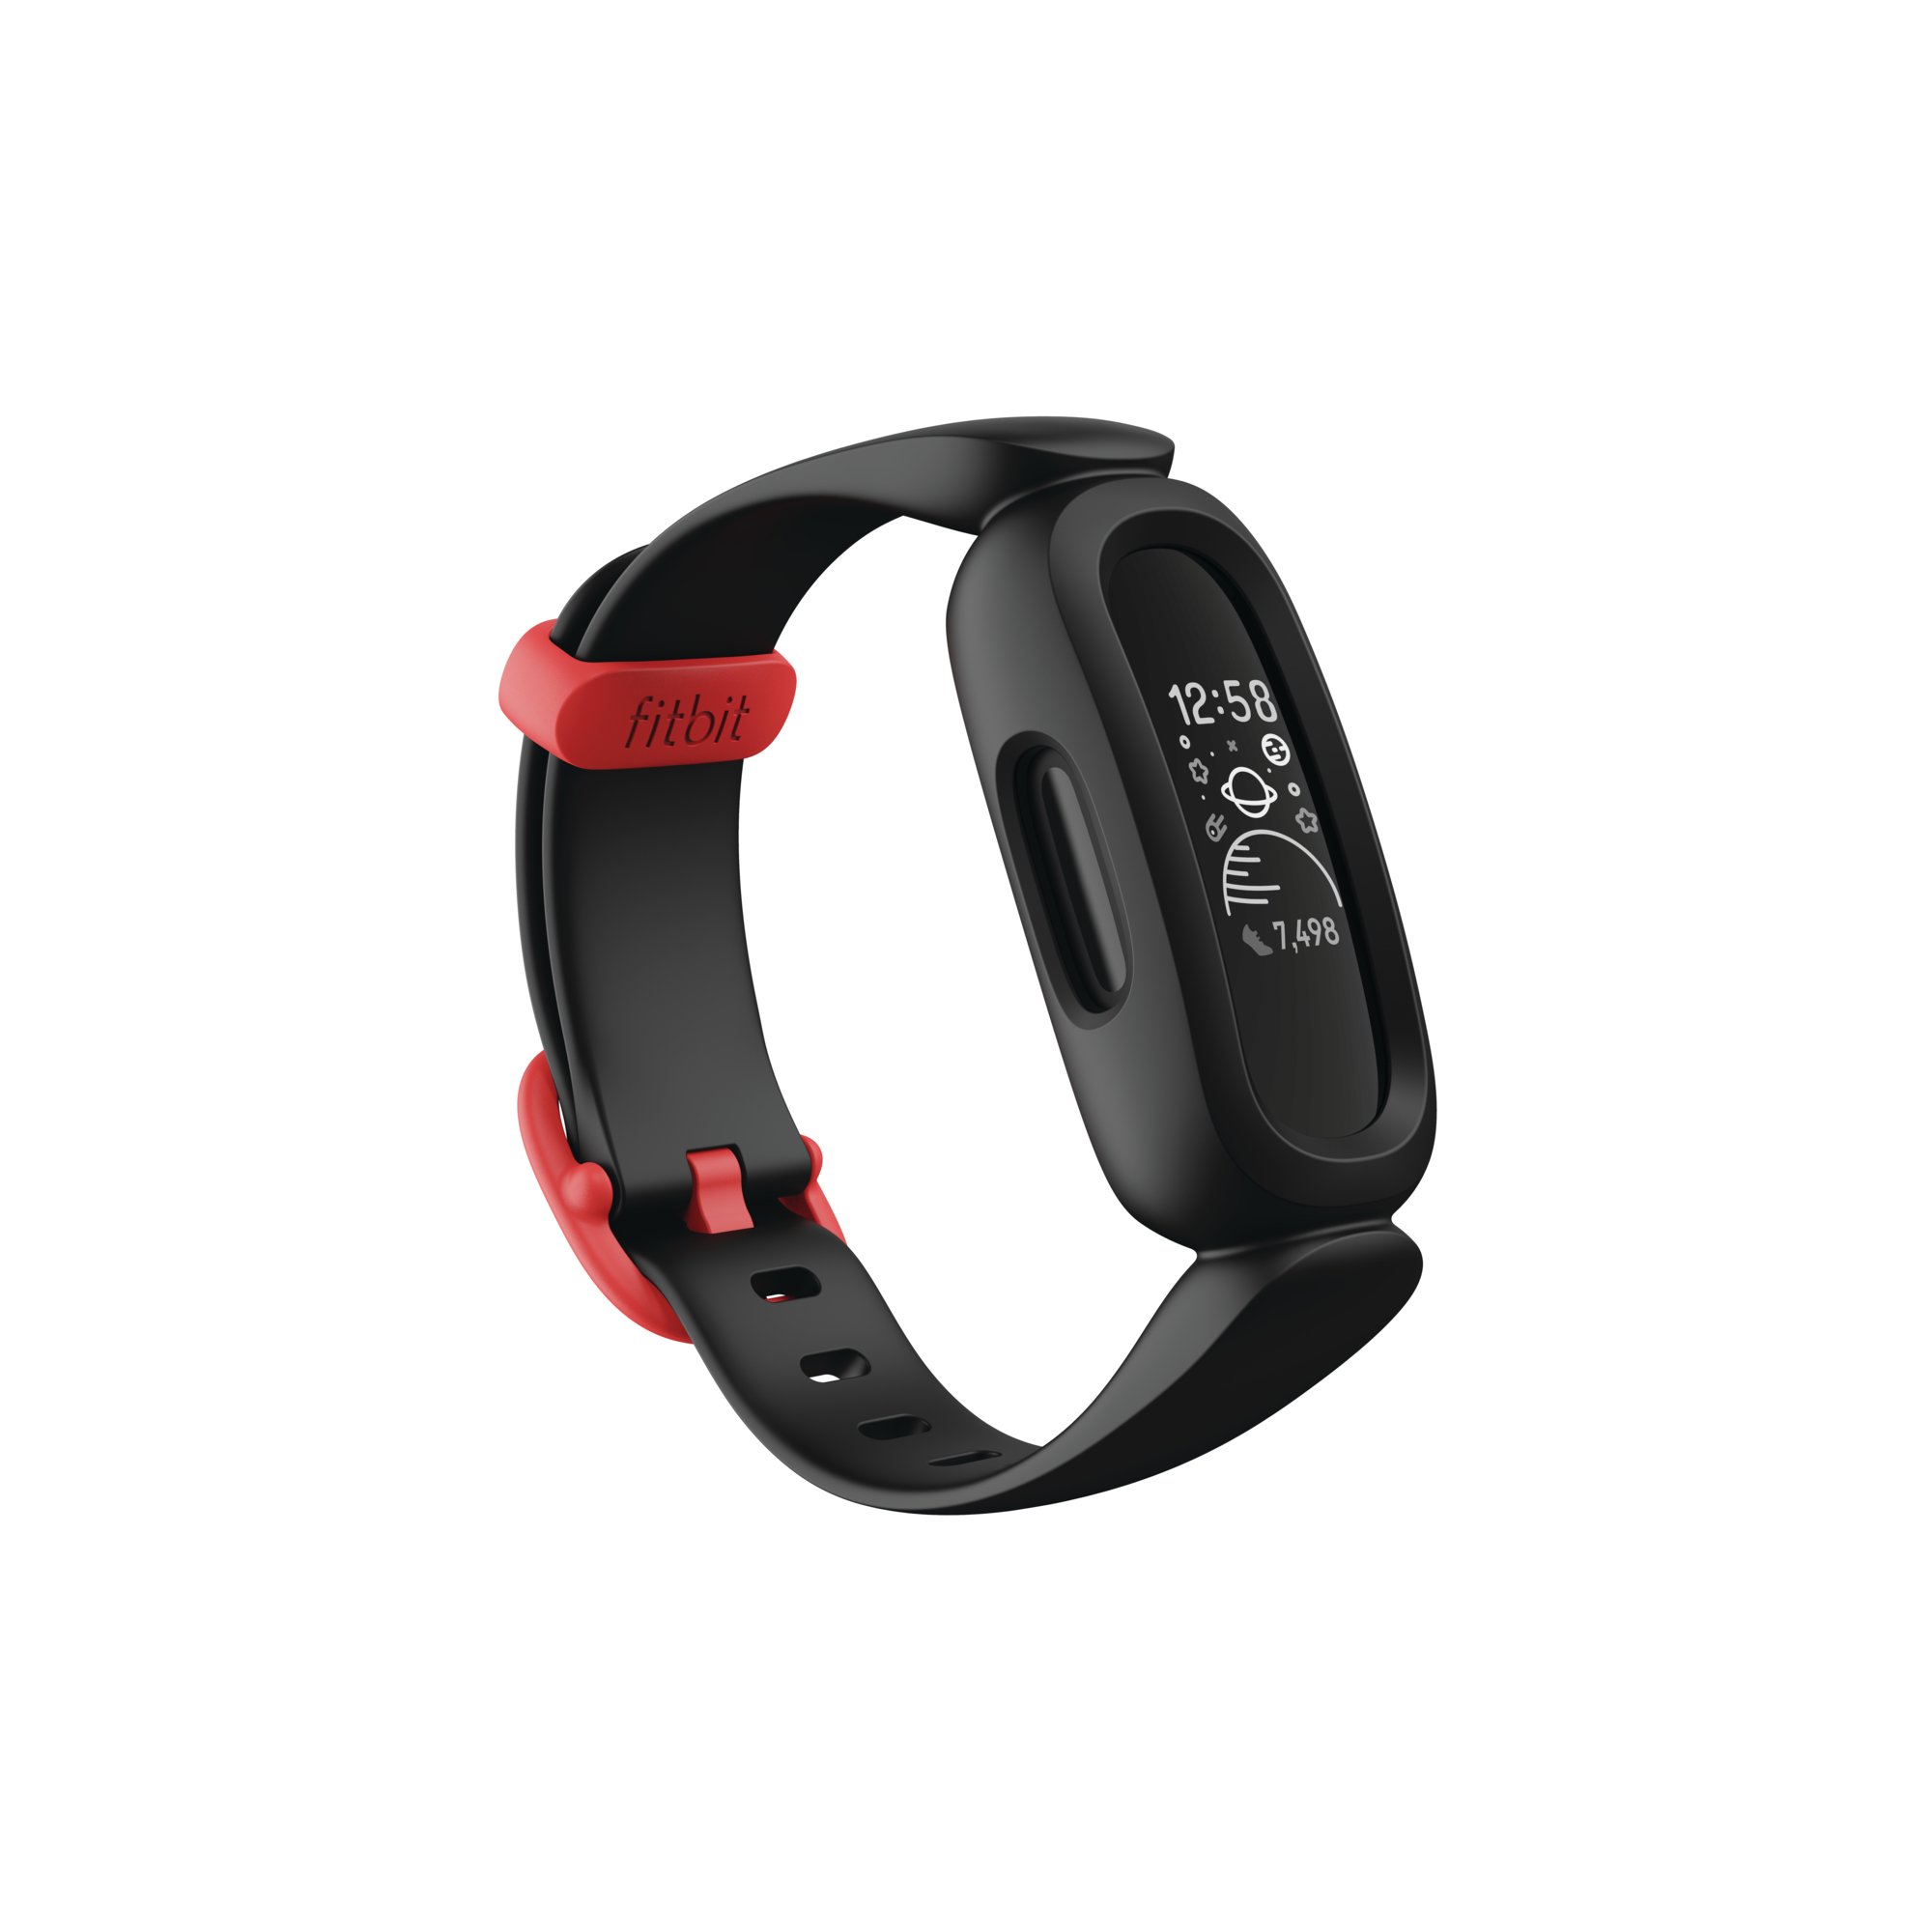 Fitbit Kids' Ace 3 Health & Fitness Tracker (Black/Racer Red) $49 & More + Free Shipping